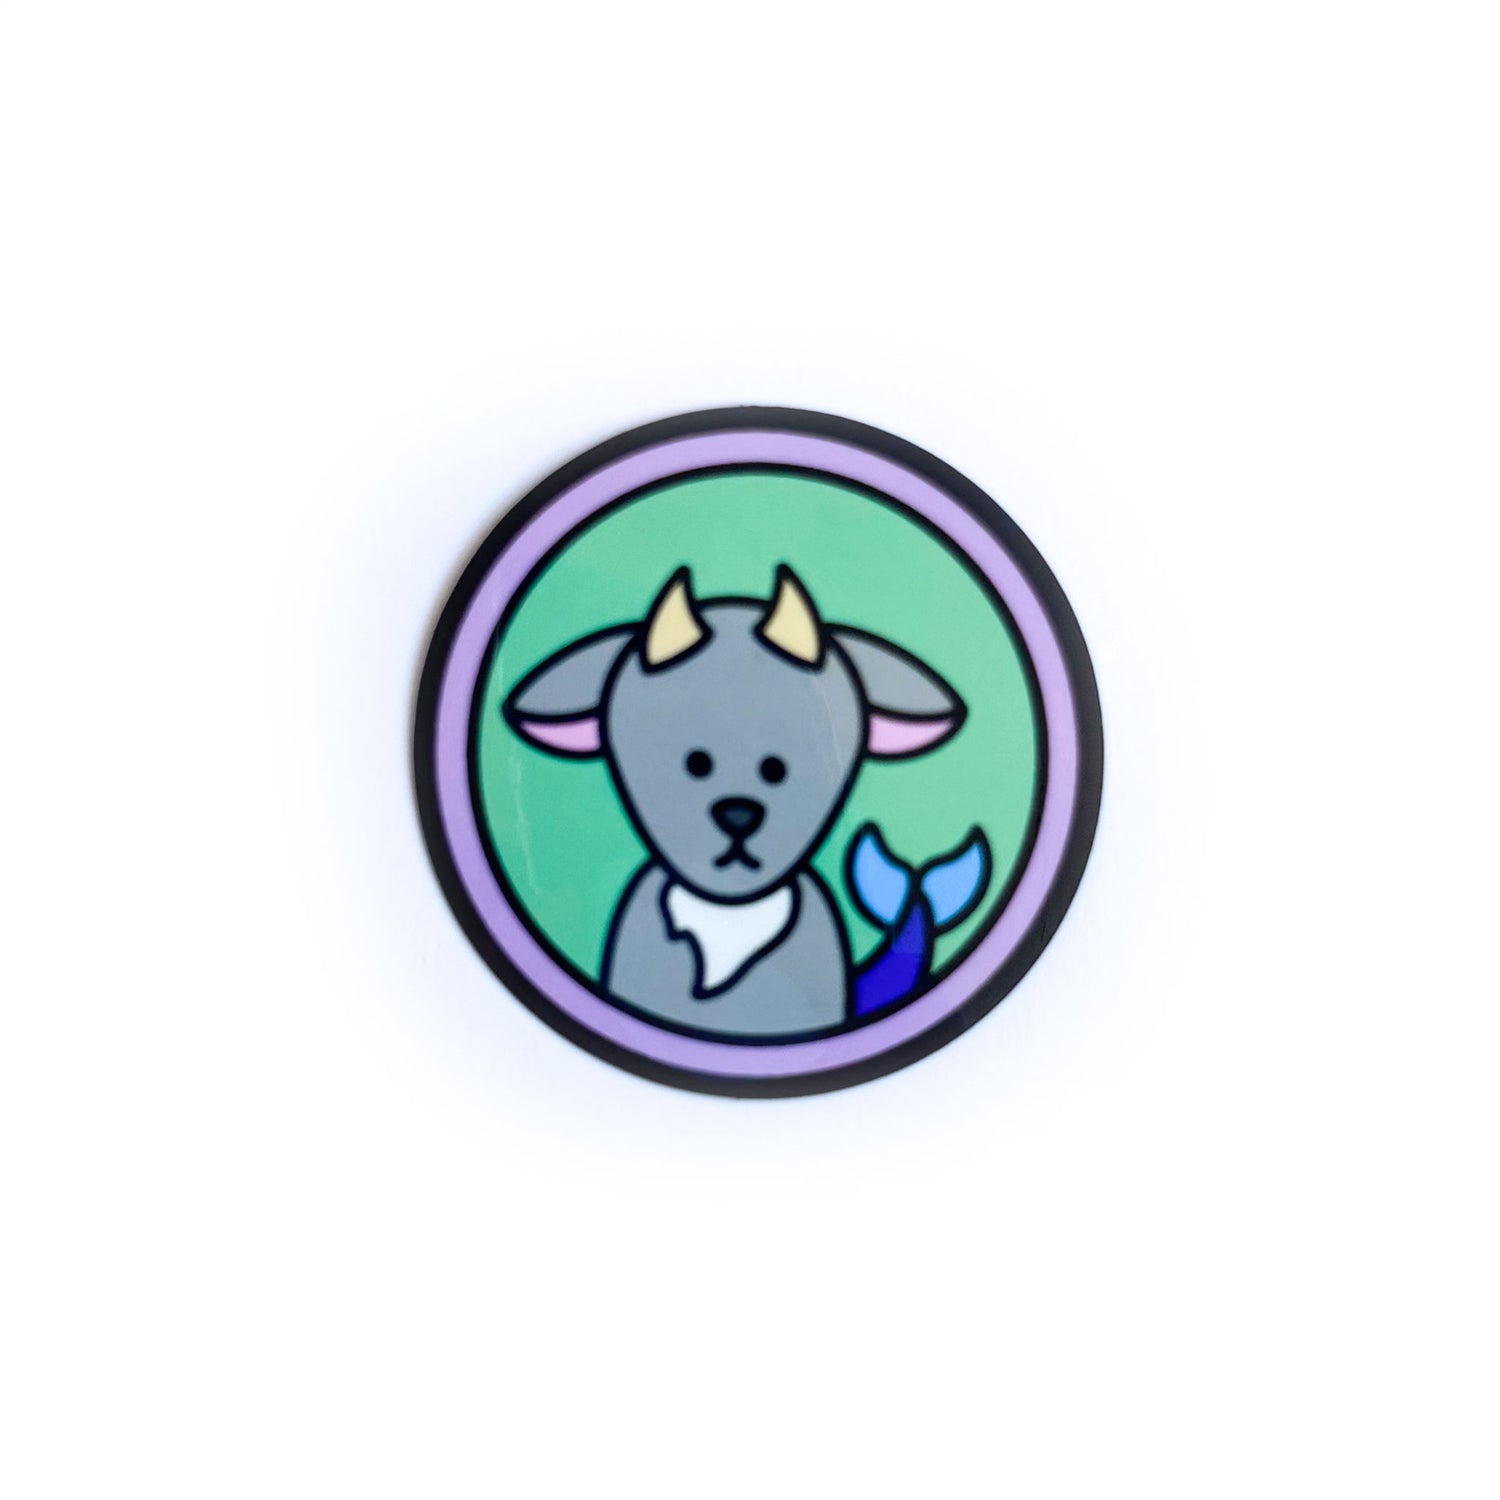 A circle sticker with a cute illustration of a sea goat on it representing the Capricorn zodiac sign.